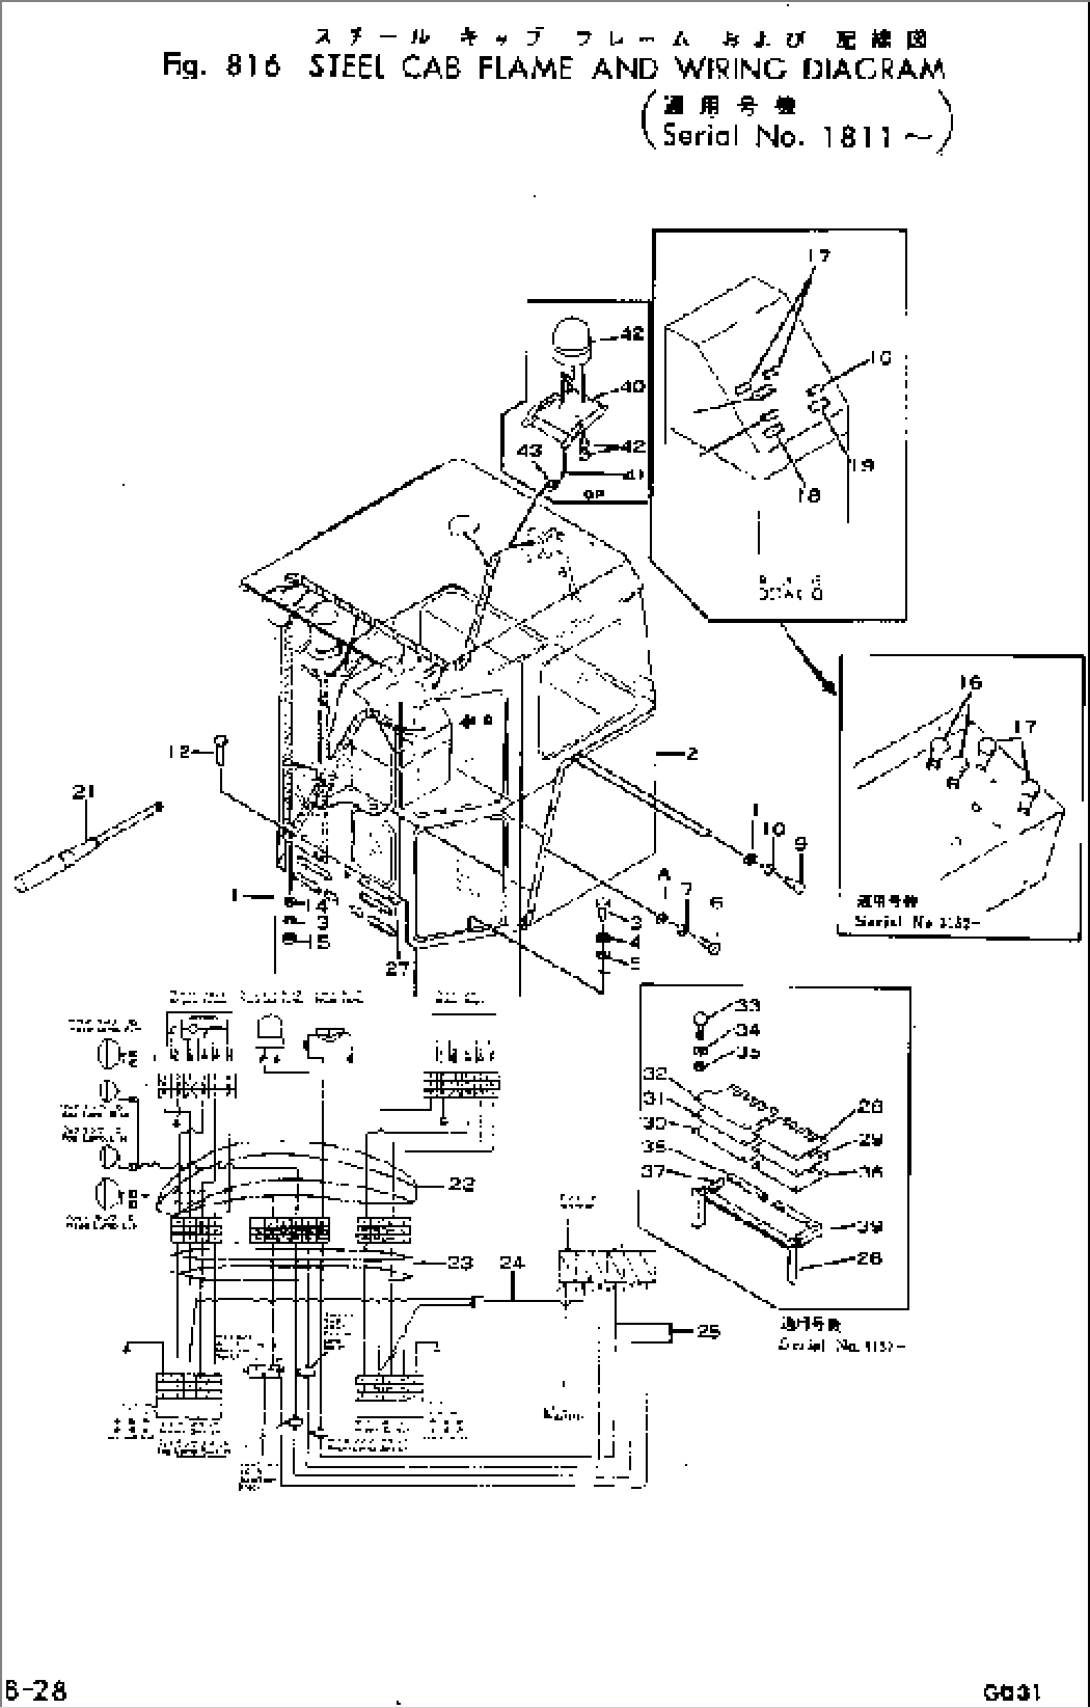 STEEL CAB FLAME AND WIRING DIAGRAM